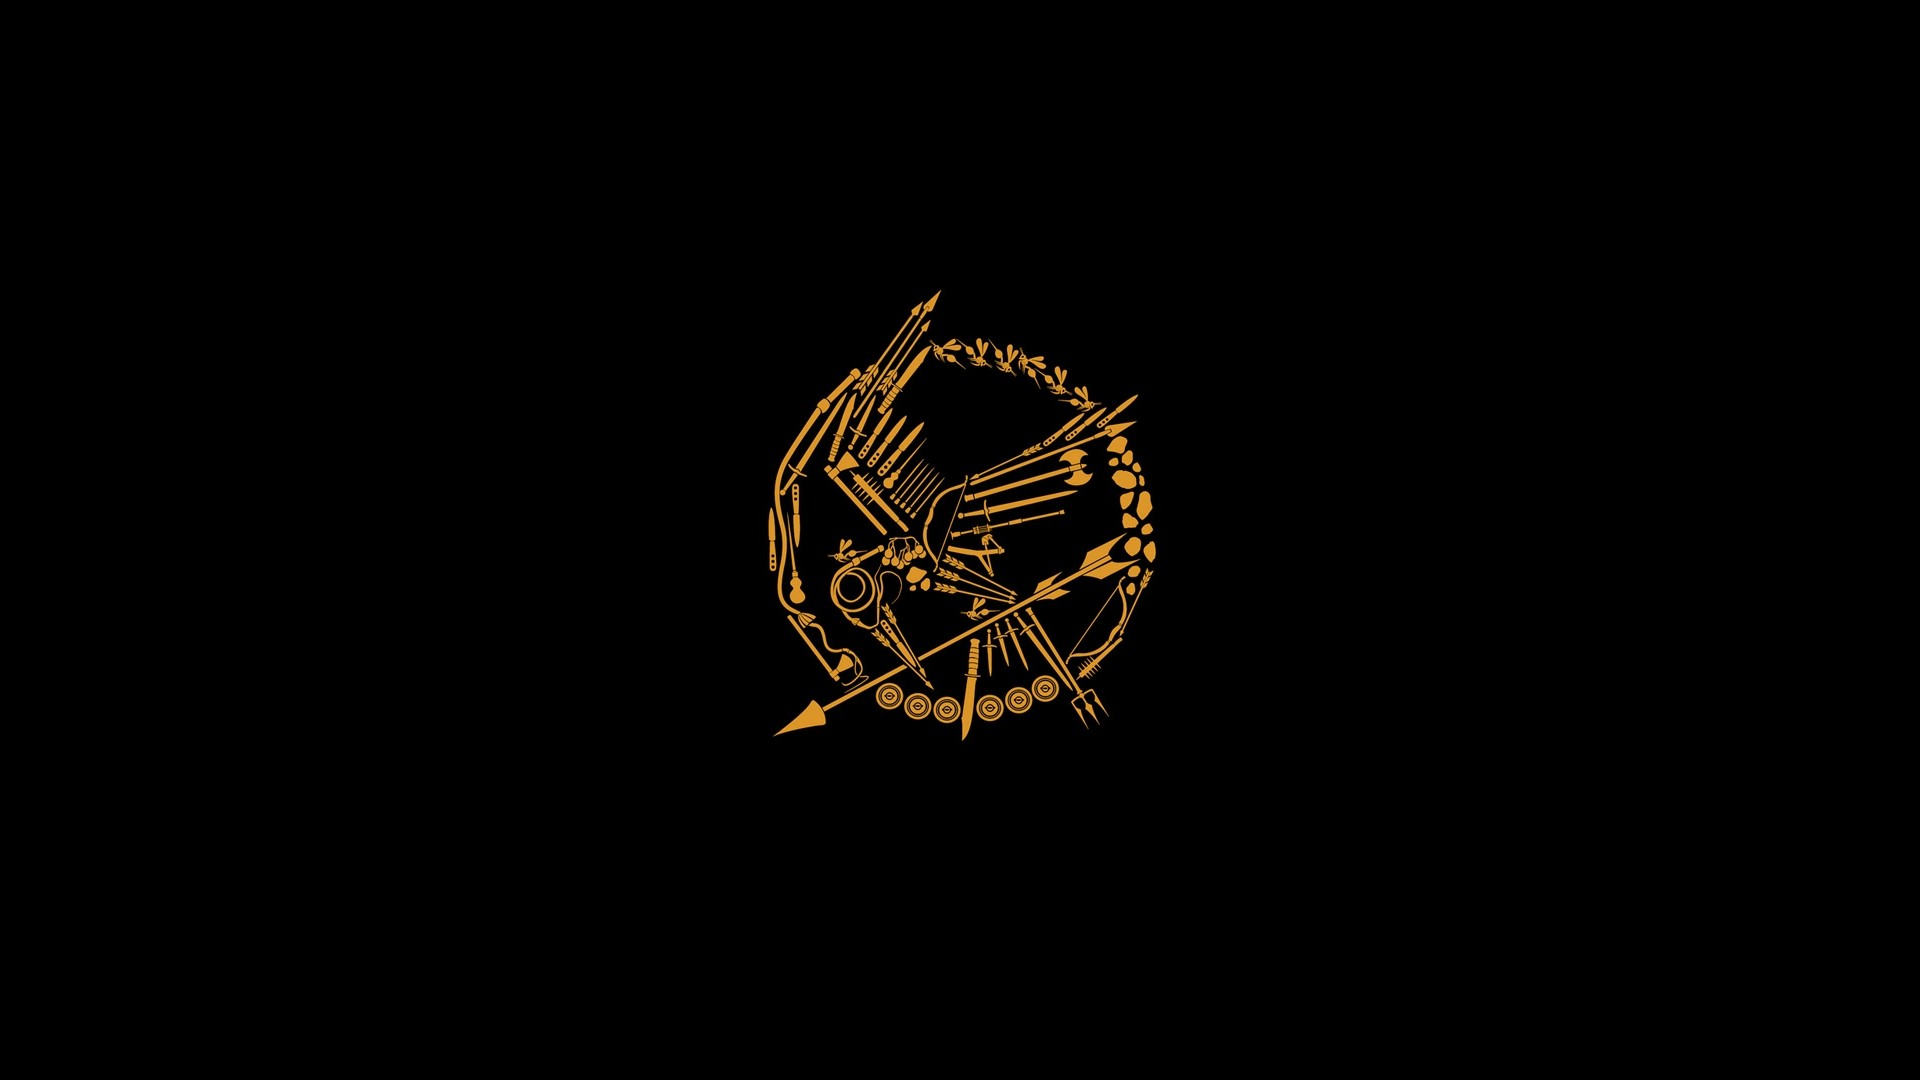 The Hunger Games HD Wallpaper Background